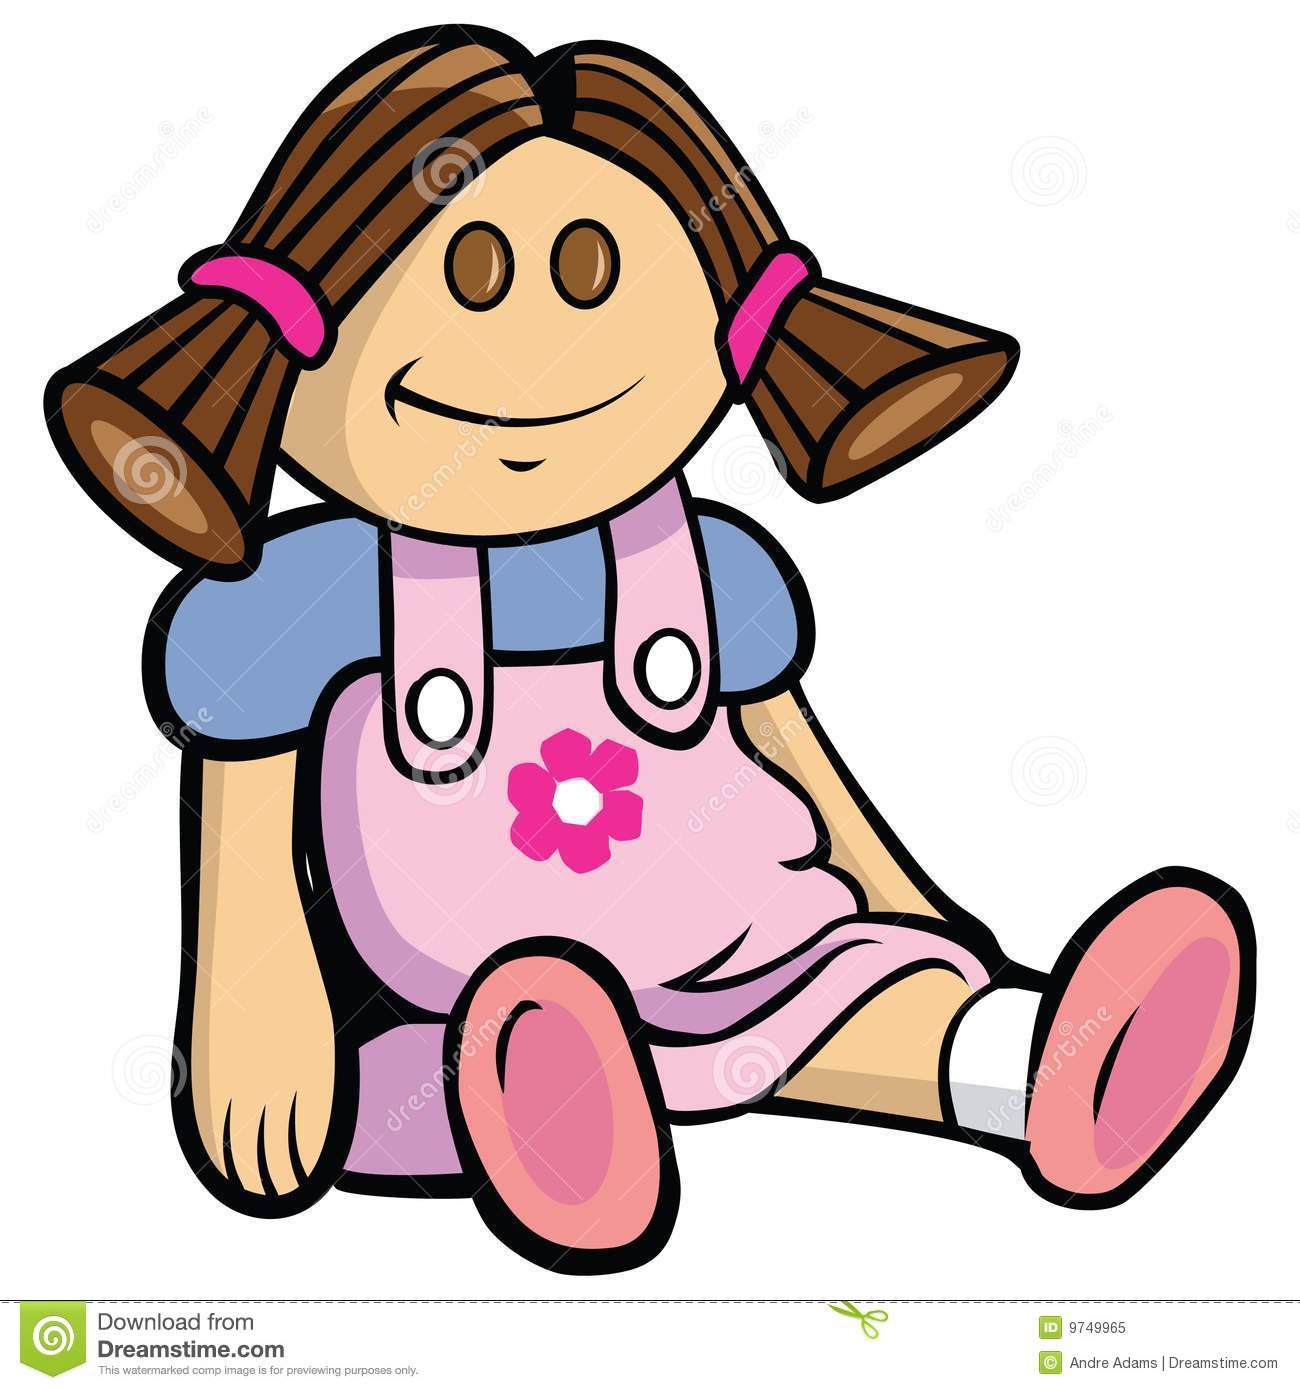 dolls clipart toy doll